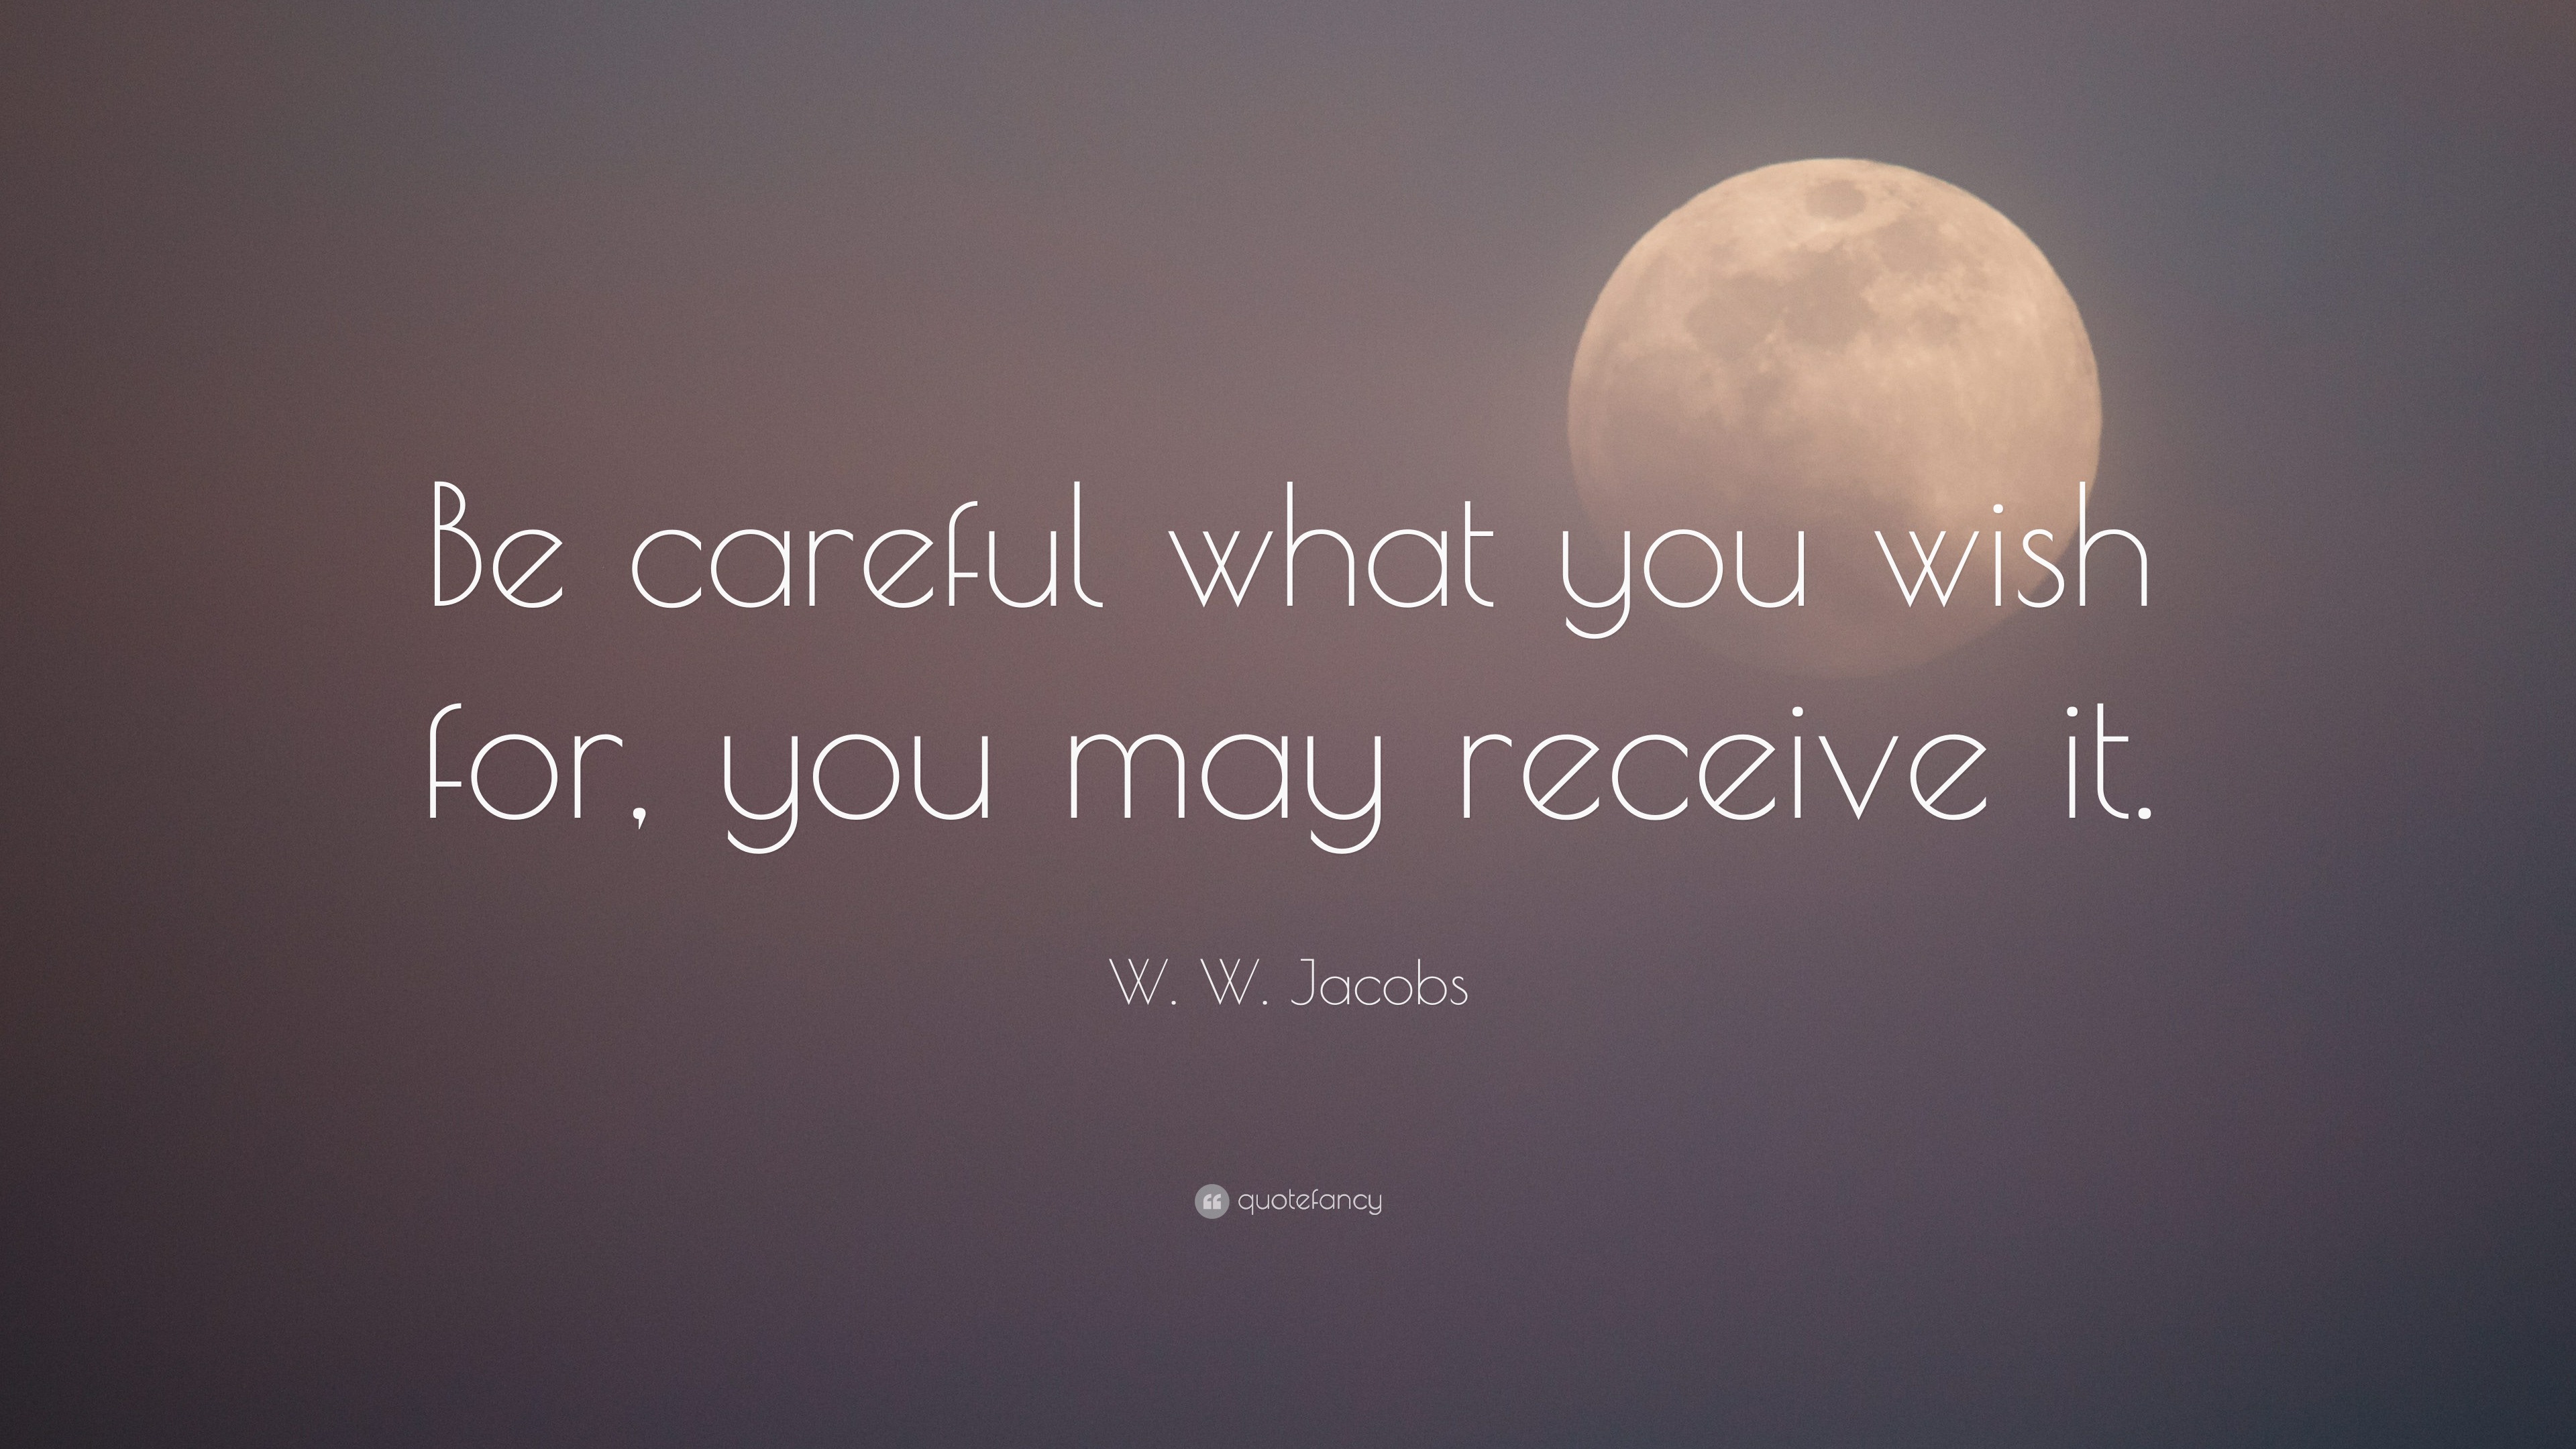 W.W. Jacobs Quote: “Be careful what you wish for, you may receive it.” (7  wallpapers) - Quotefancy